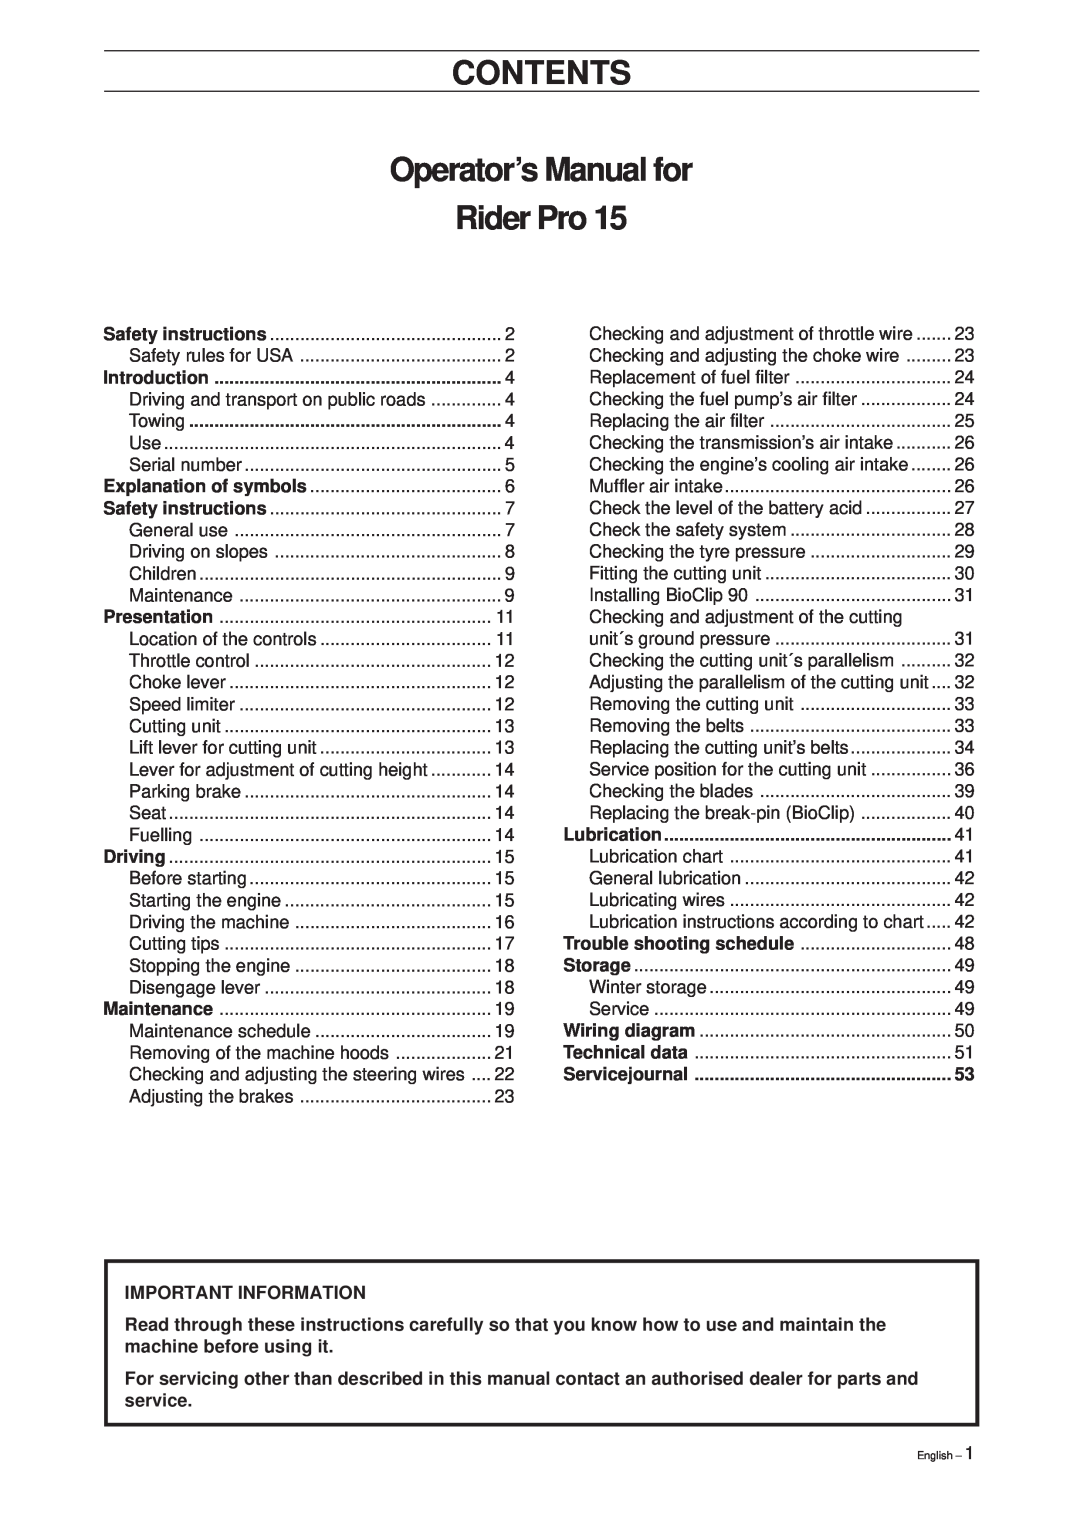 Husqvarna Pro 15 manual CONTENTS Operator’s Manual for Rider Pro, Important Information 